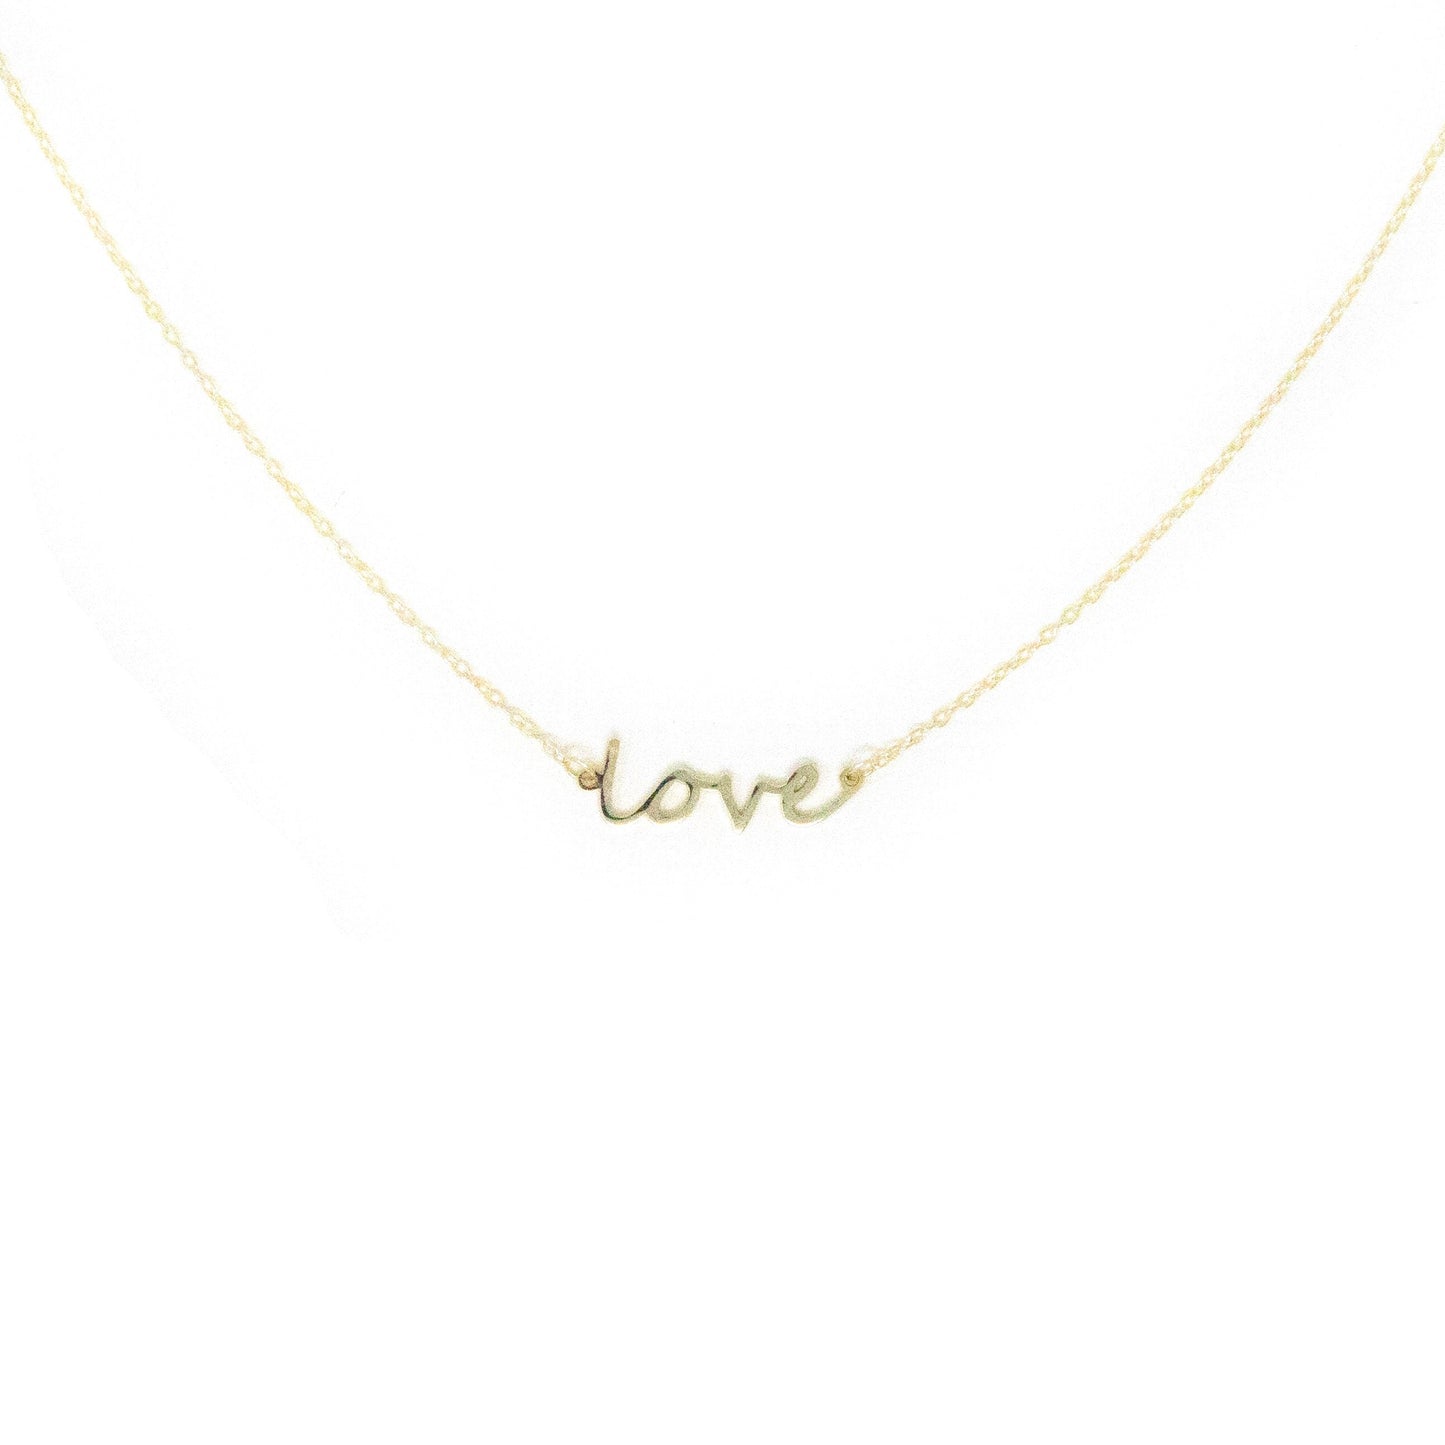 Love Dainty Necklace necklace The Sis Kiss Gold